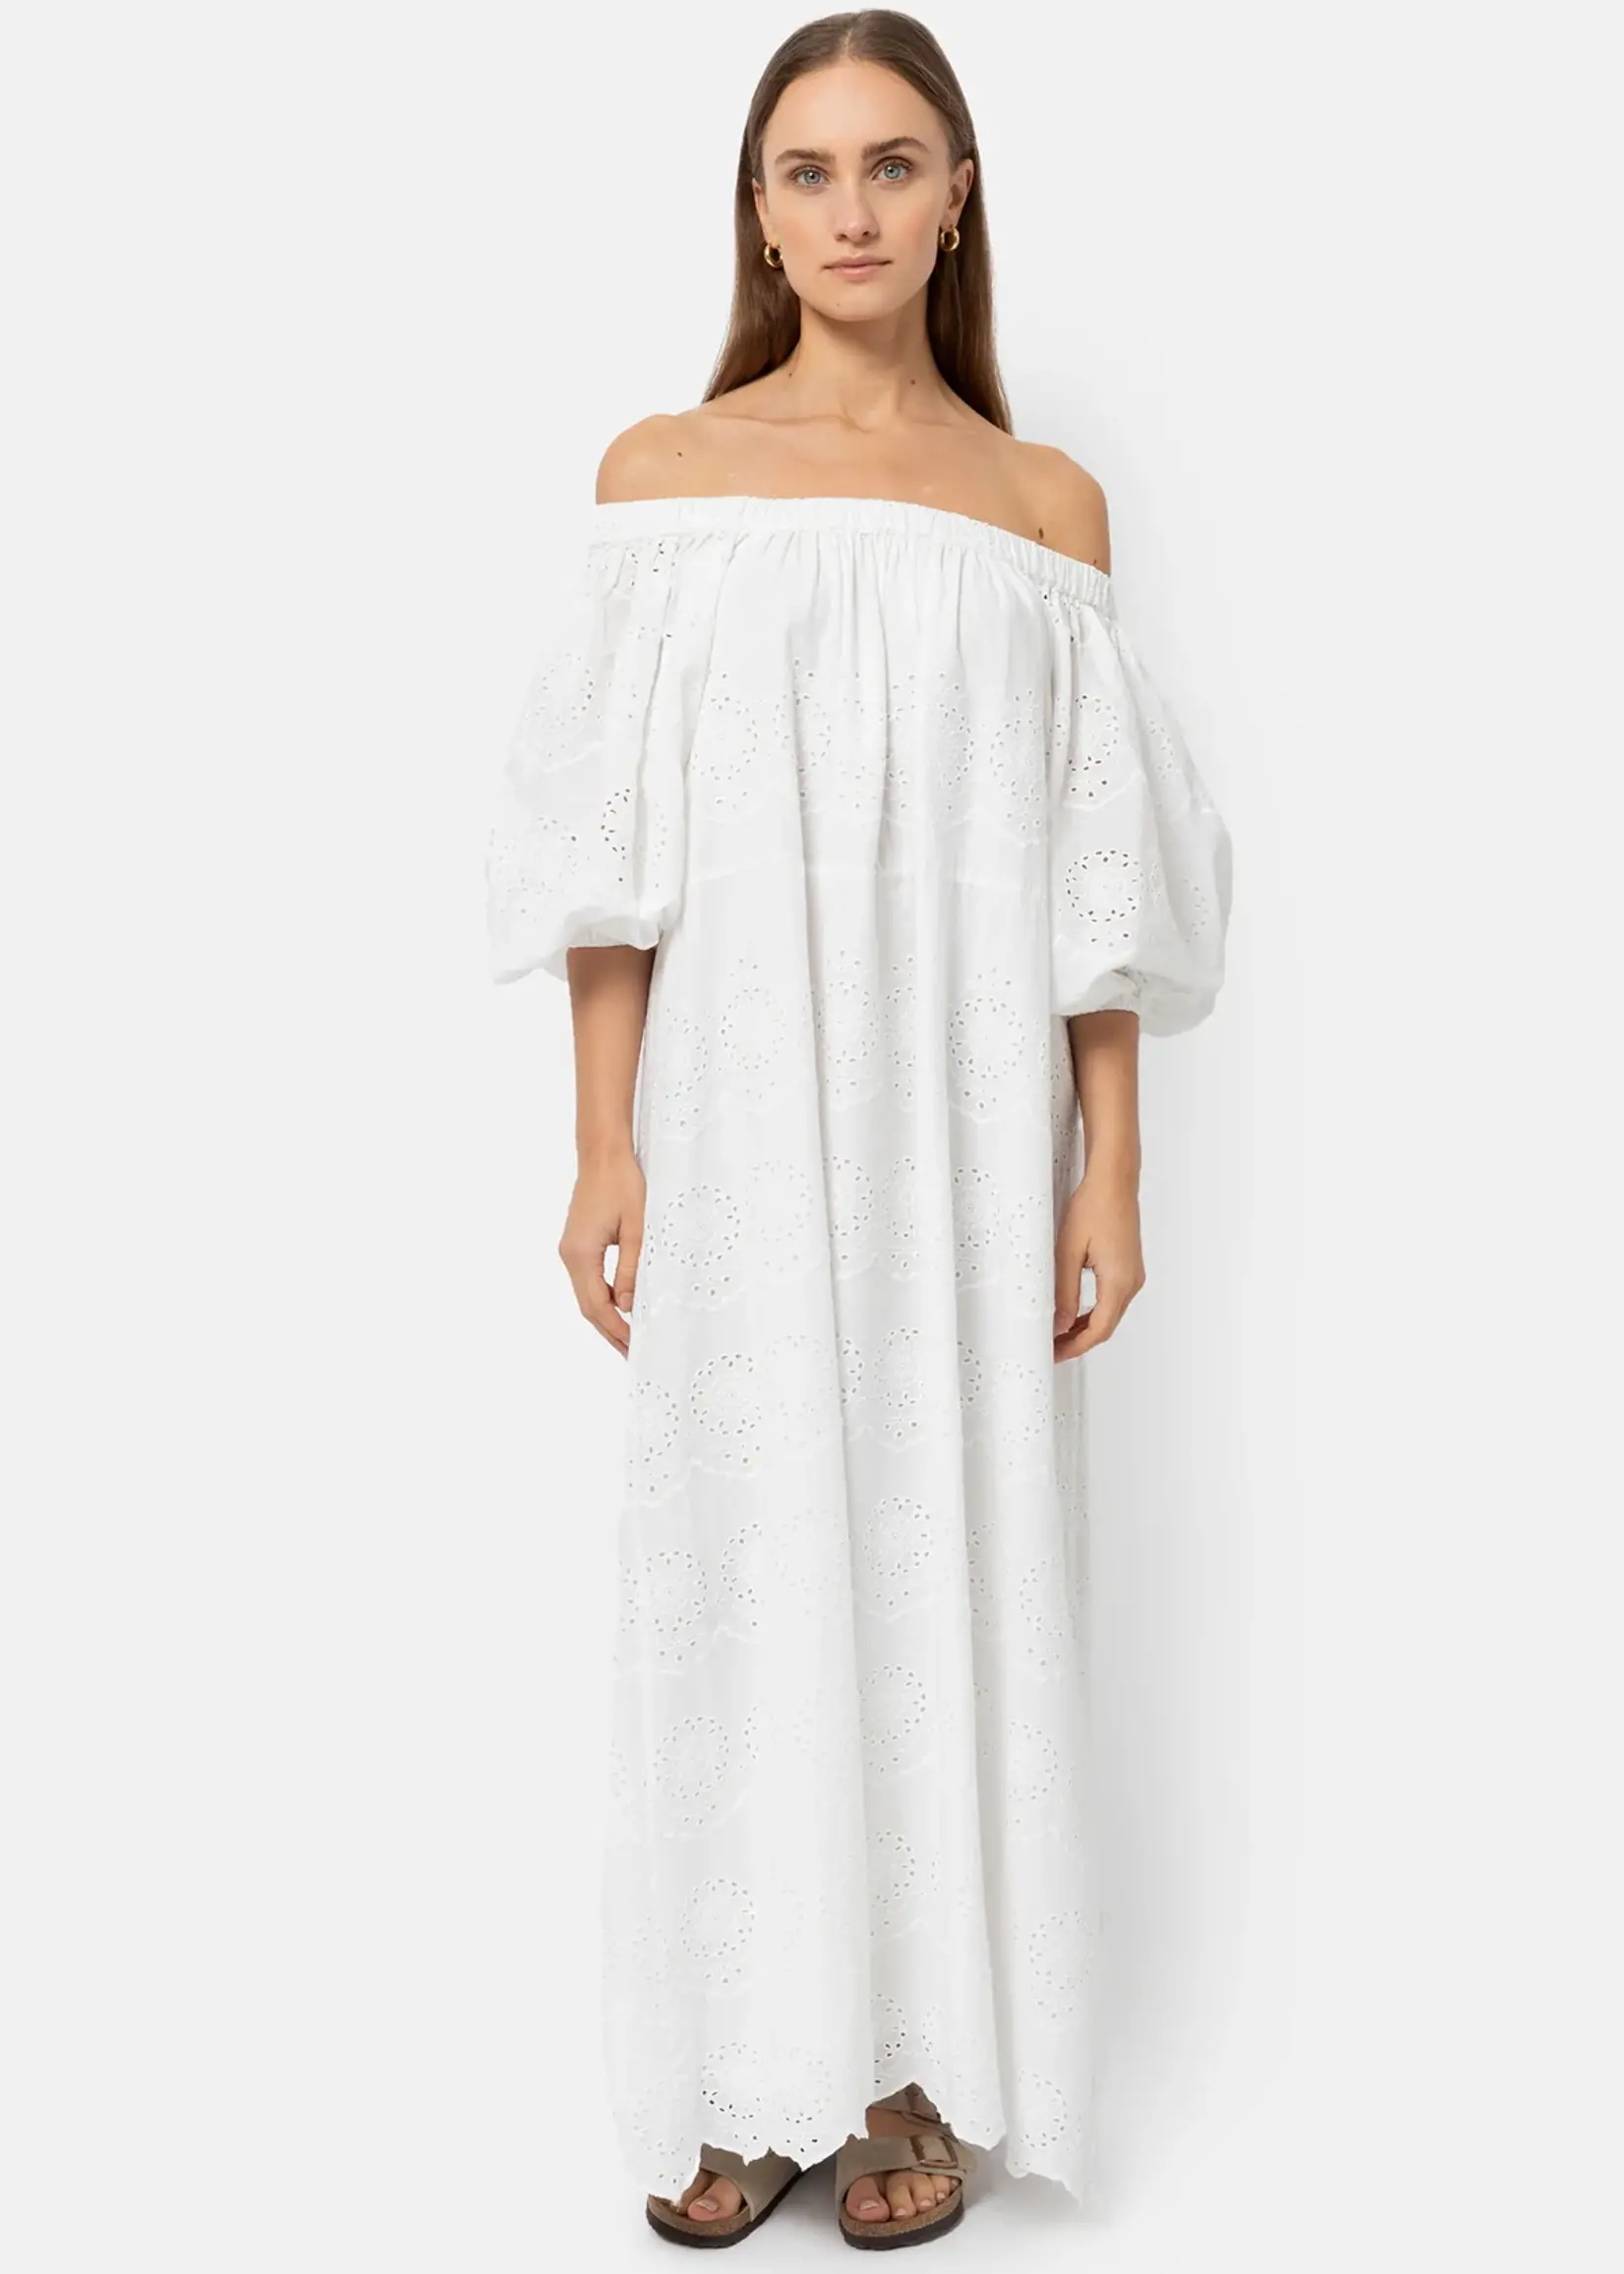 Âme Antwerp Ame antwerp jaime embroided off the shoulder dress,white